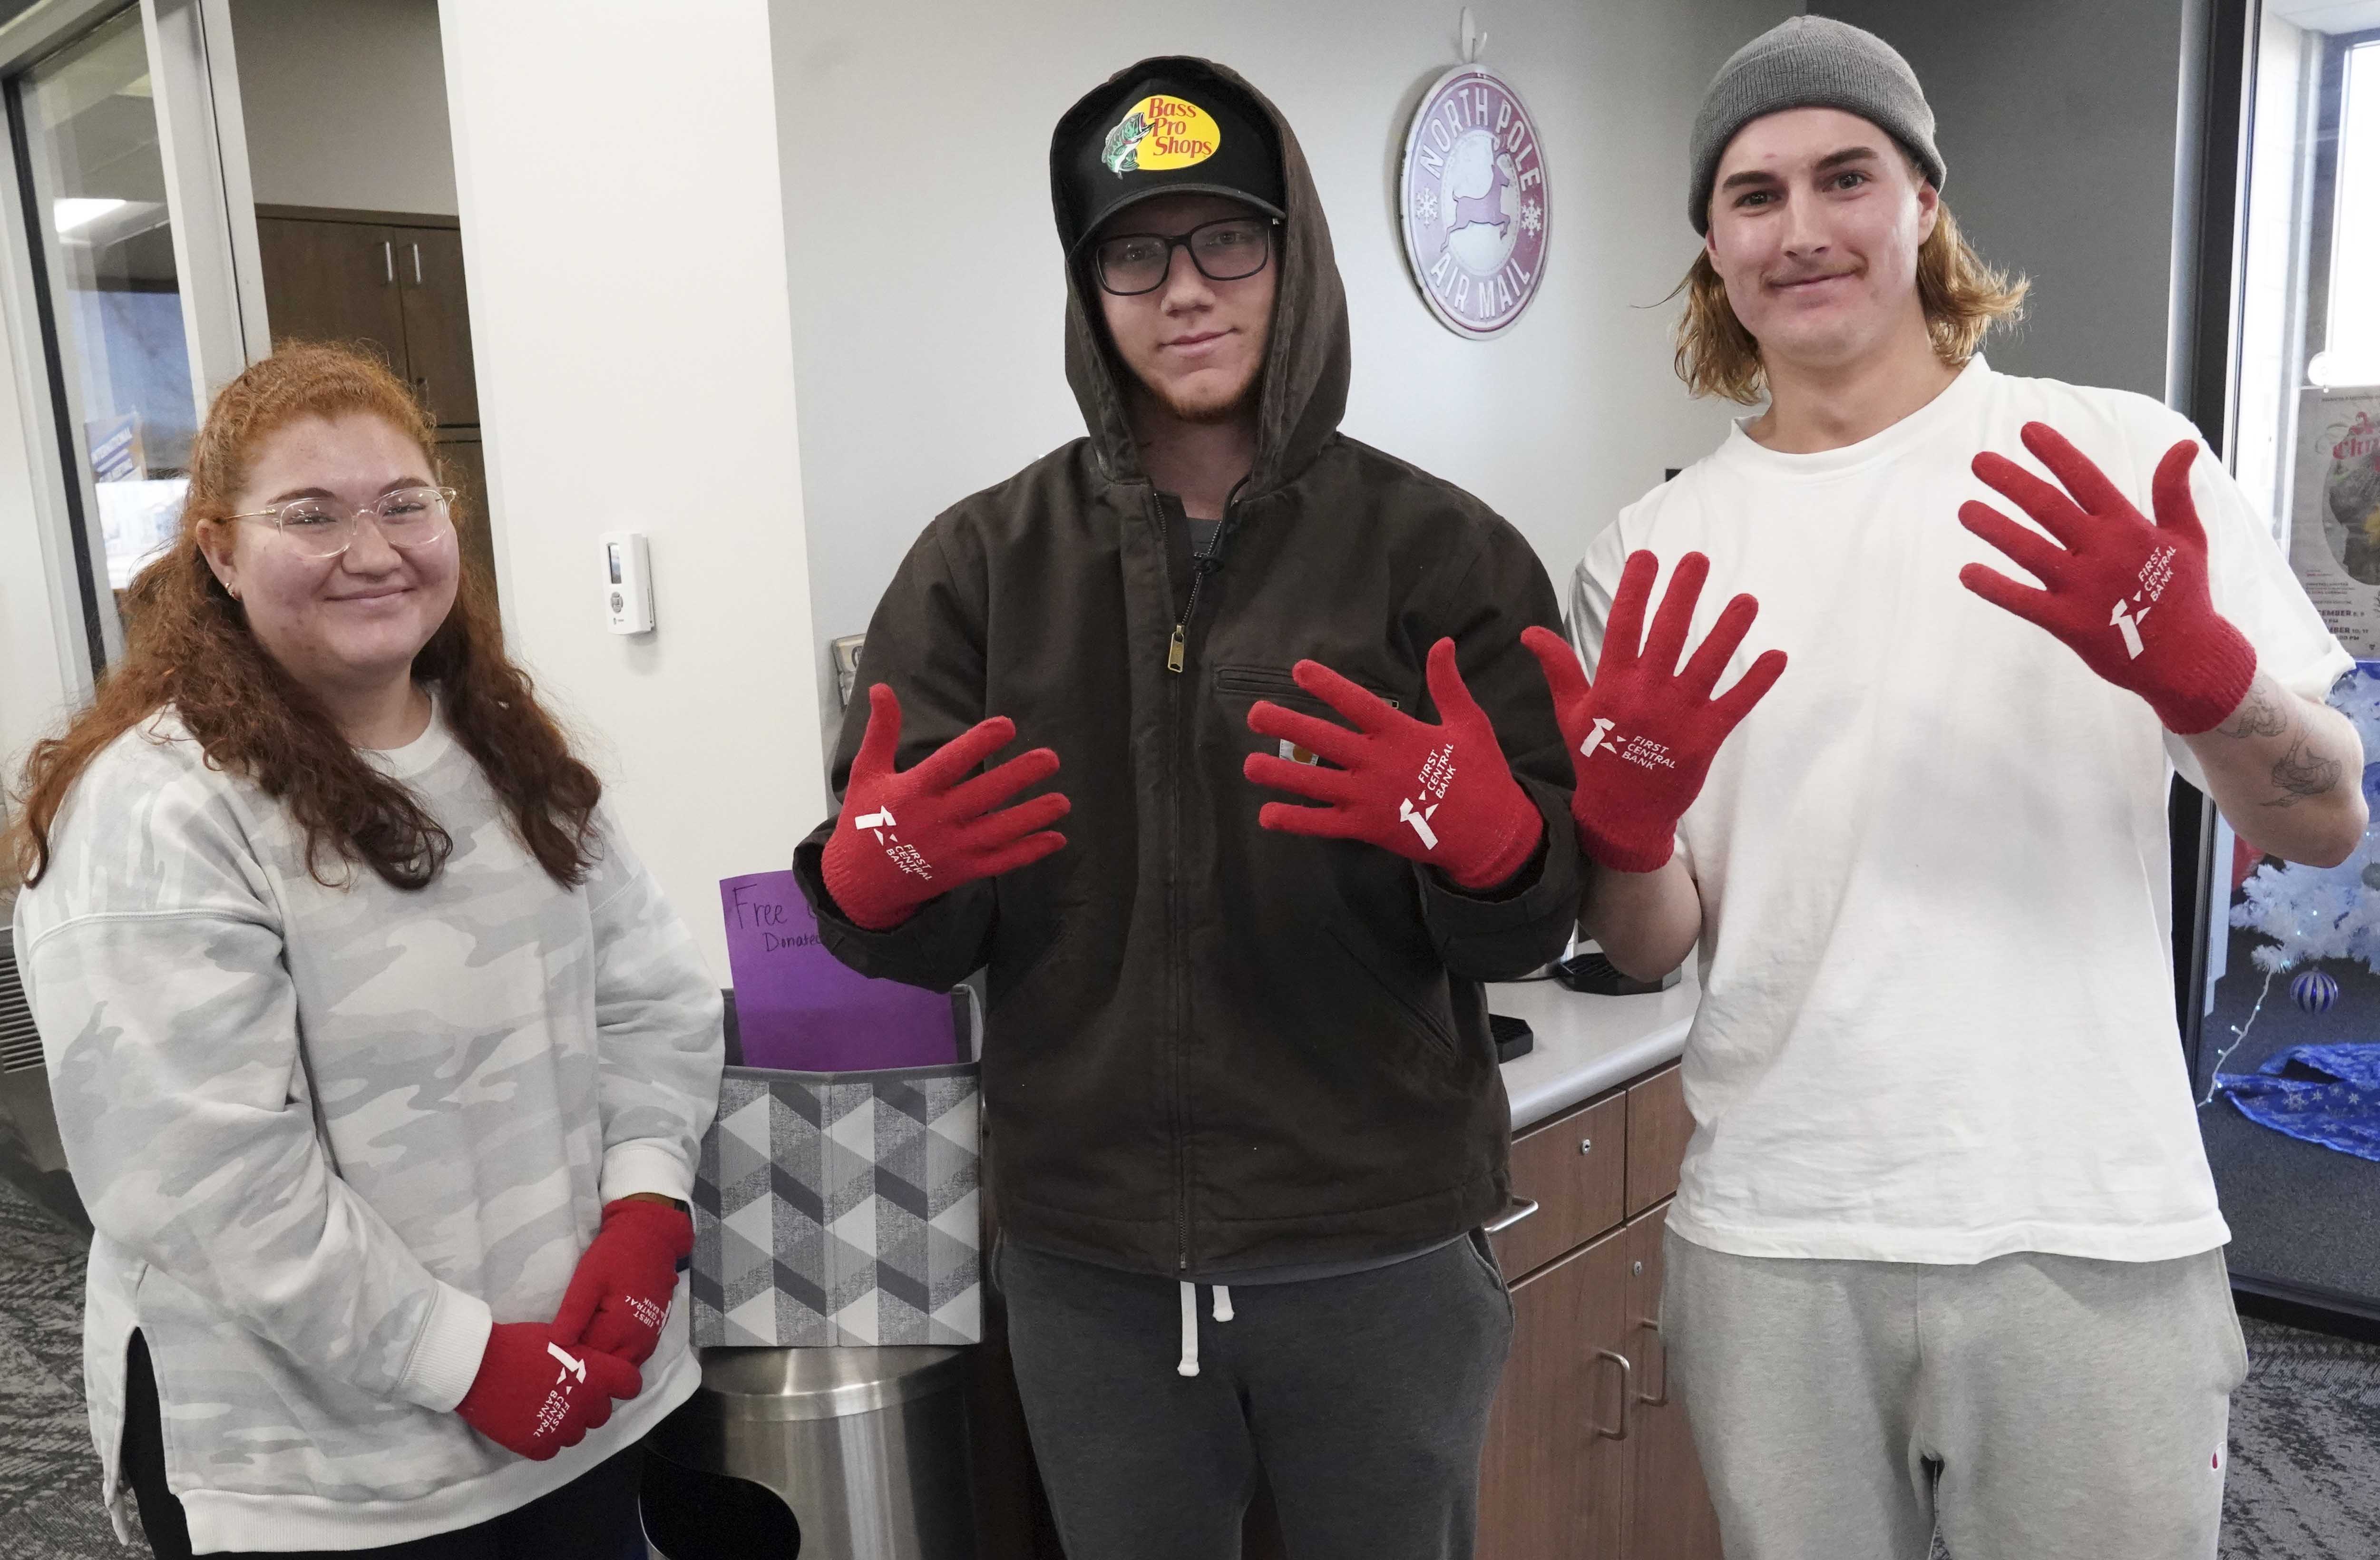 MCC sophomore zoology major Kaylee Guerrero helped coordinate a donation of 50 pair of gloves for MCC students.